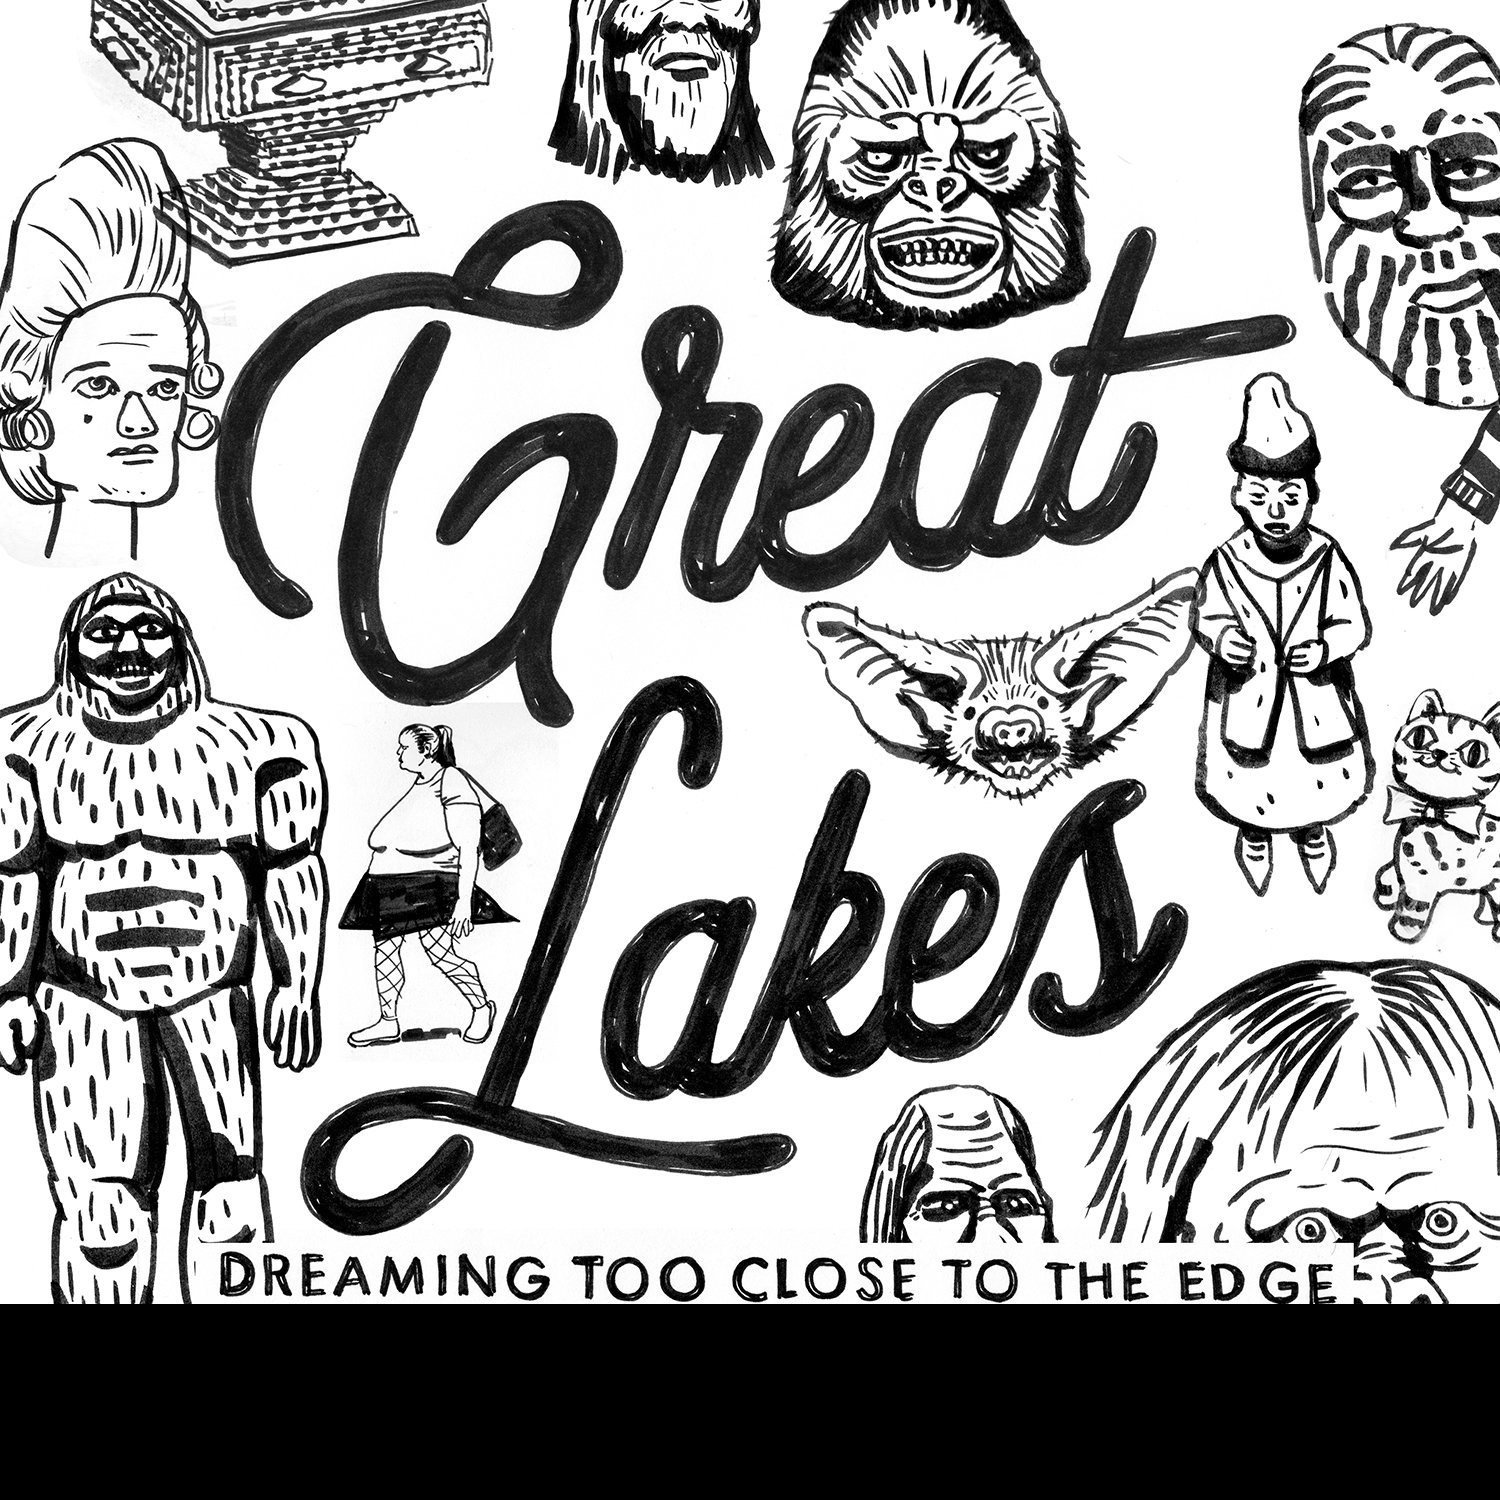 CD Shop - GREAT LAKES DREAMING TOO CLOSE TO THE EDGE